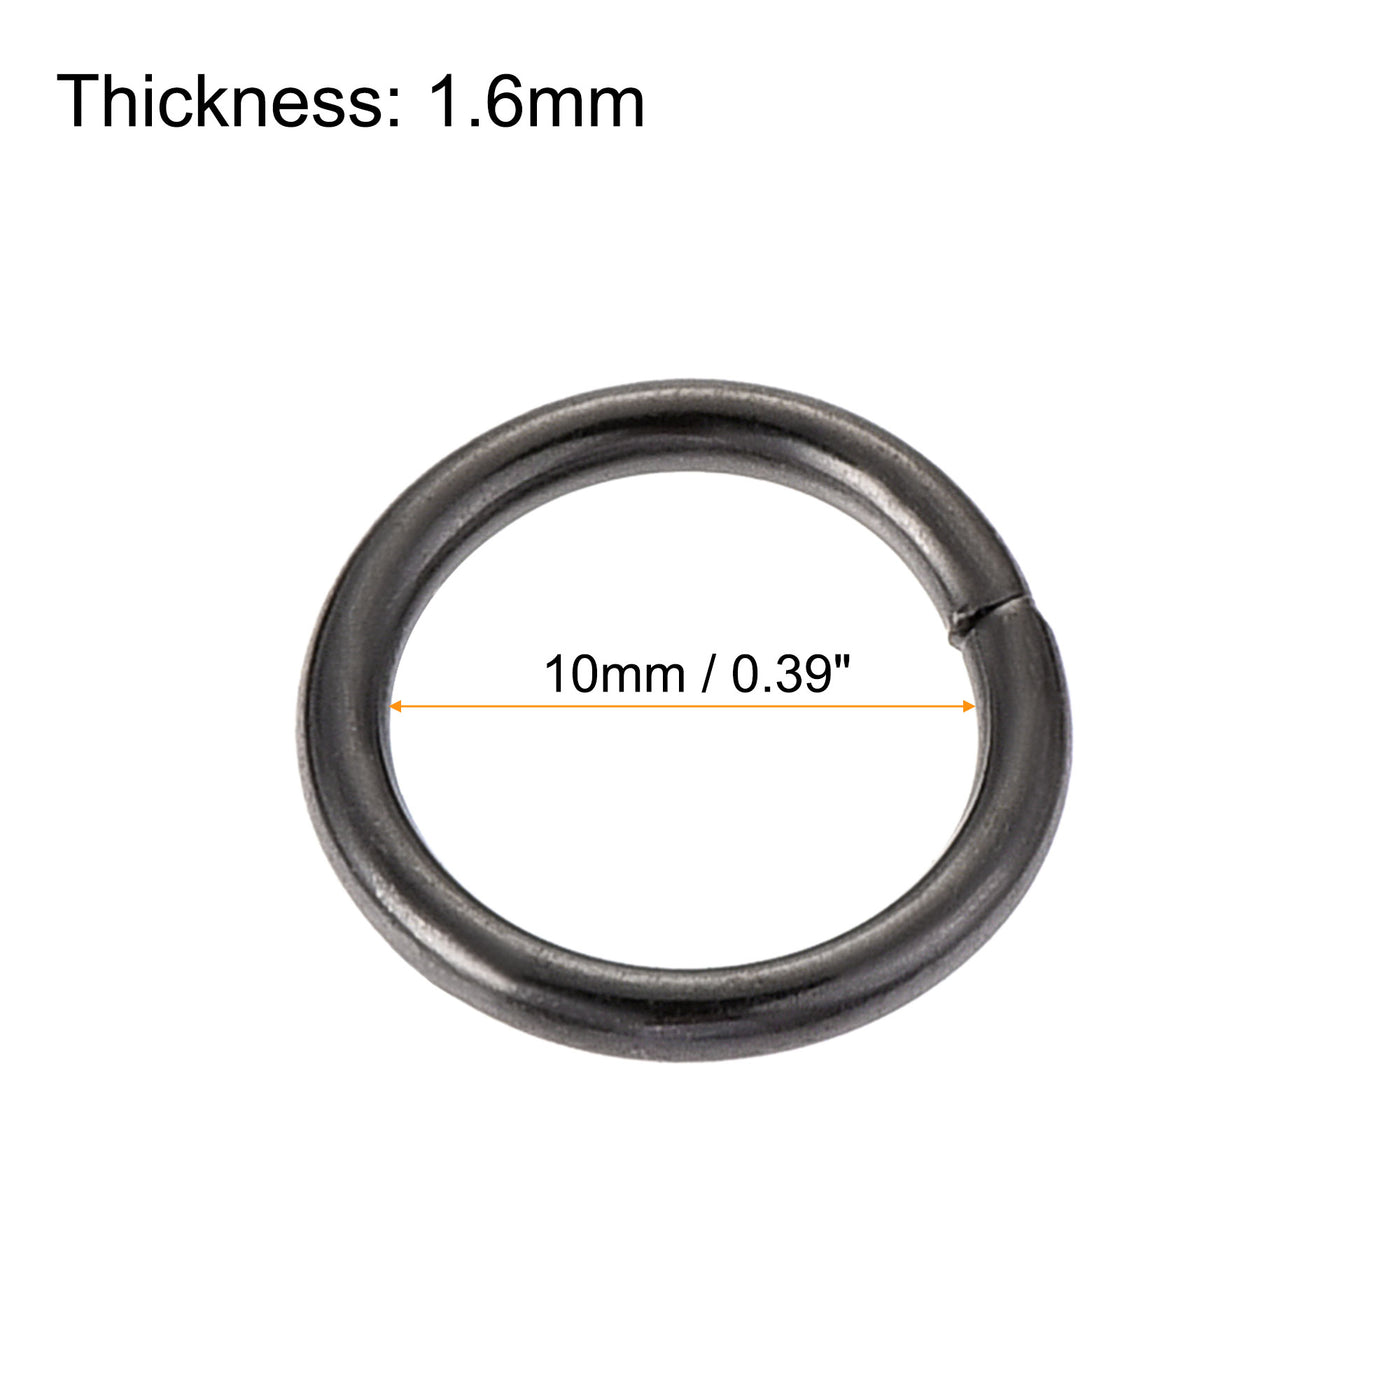 uxcell Uxcell 10mm Metal O Rings Non-Welded for Straps Bags Belts DIY Black 50pcs